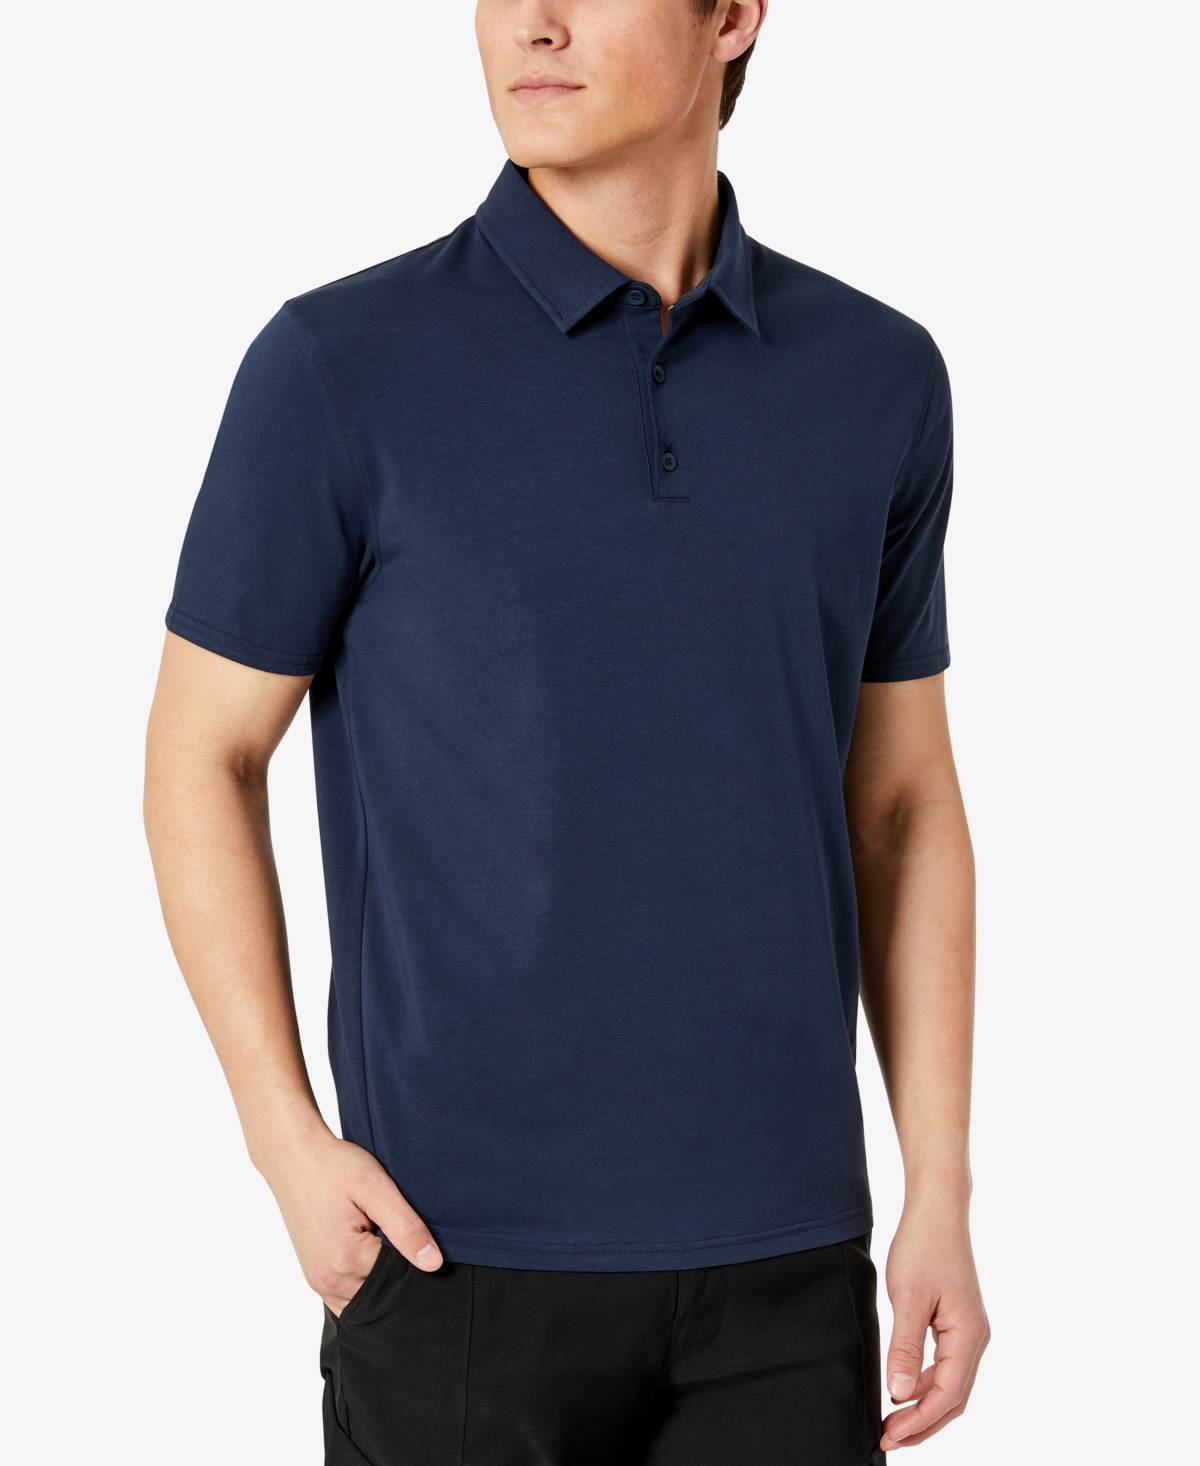 Kenneth Cole Men's Performance Button Polo